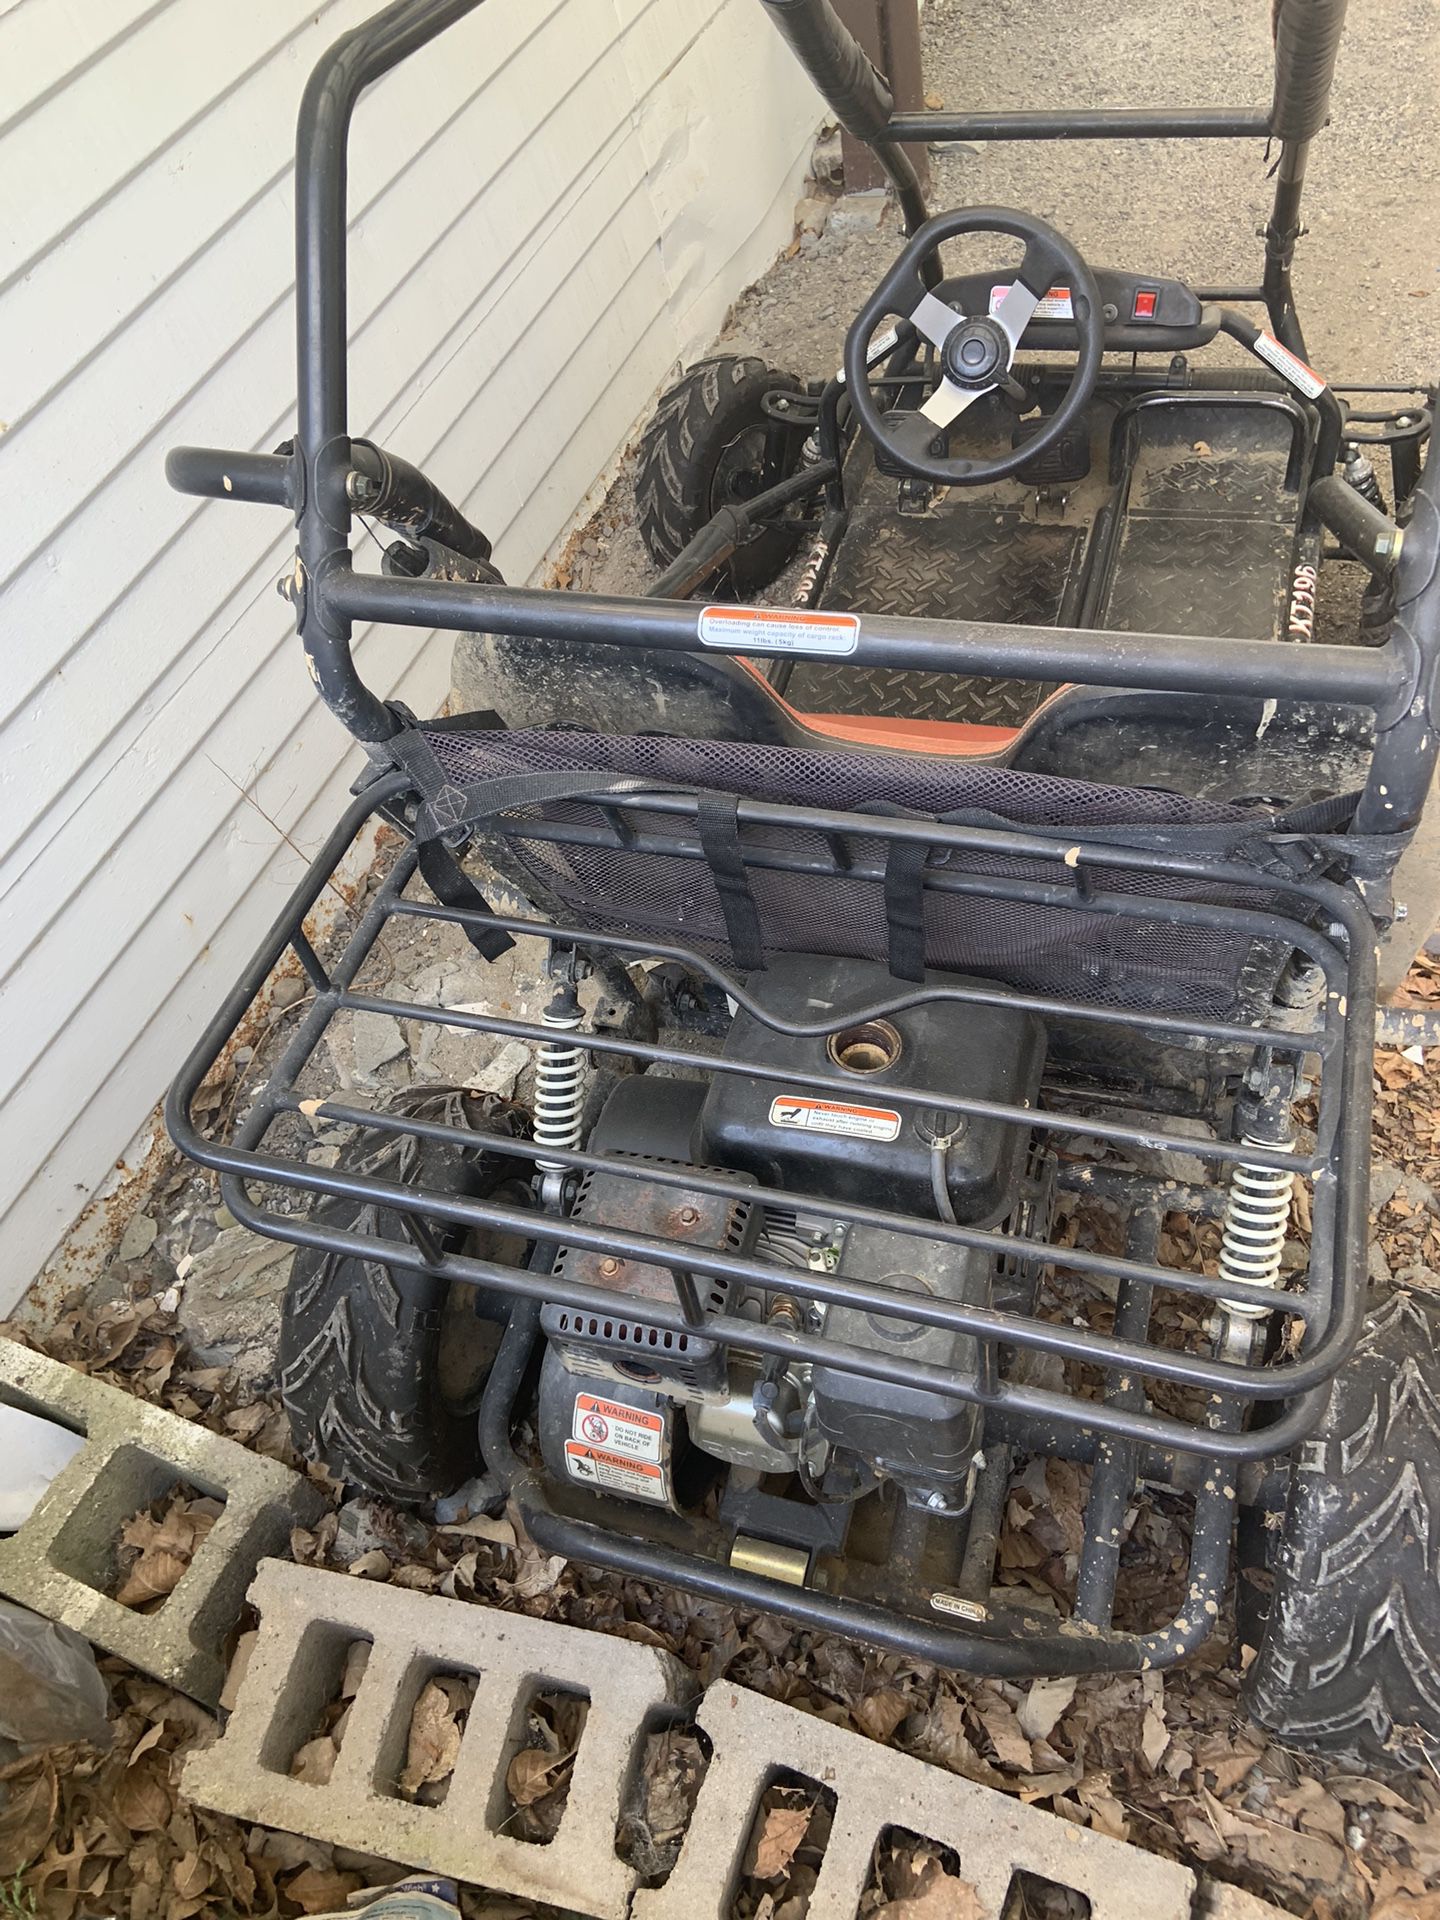 Go Carts For Sale